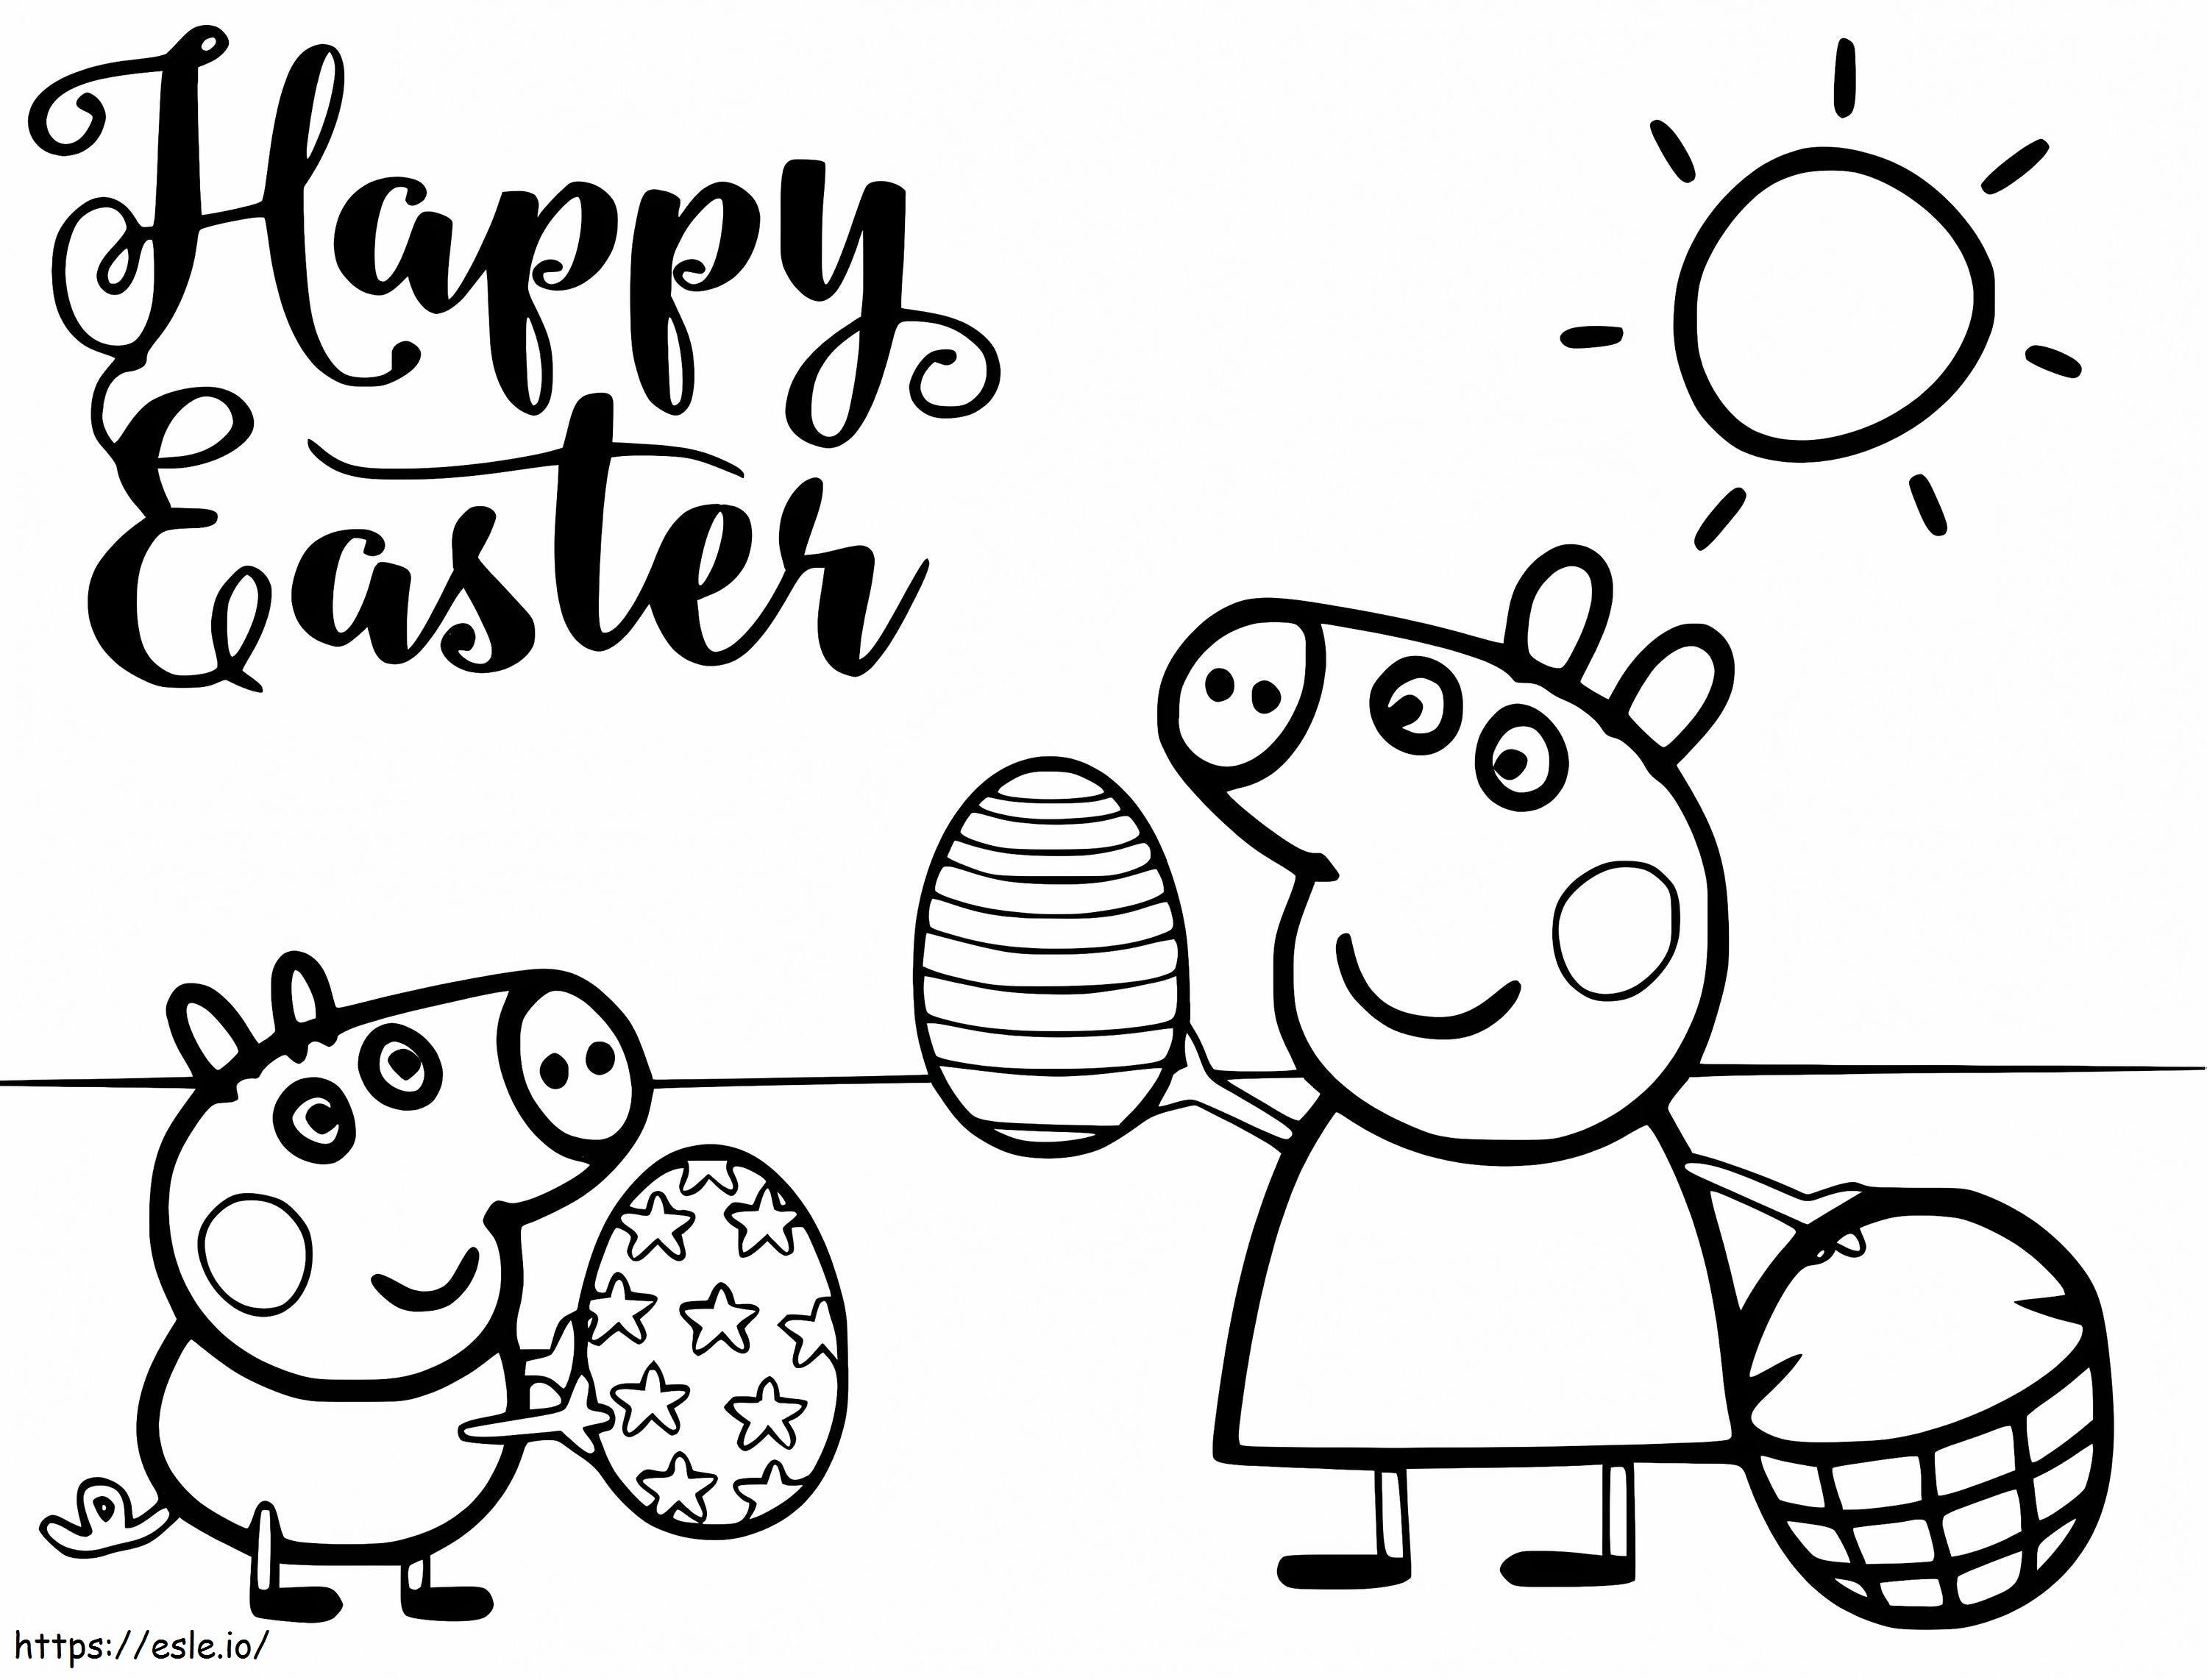 Happy Easter With Peppa Pig coloring page